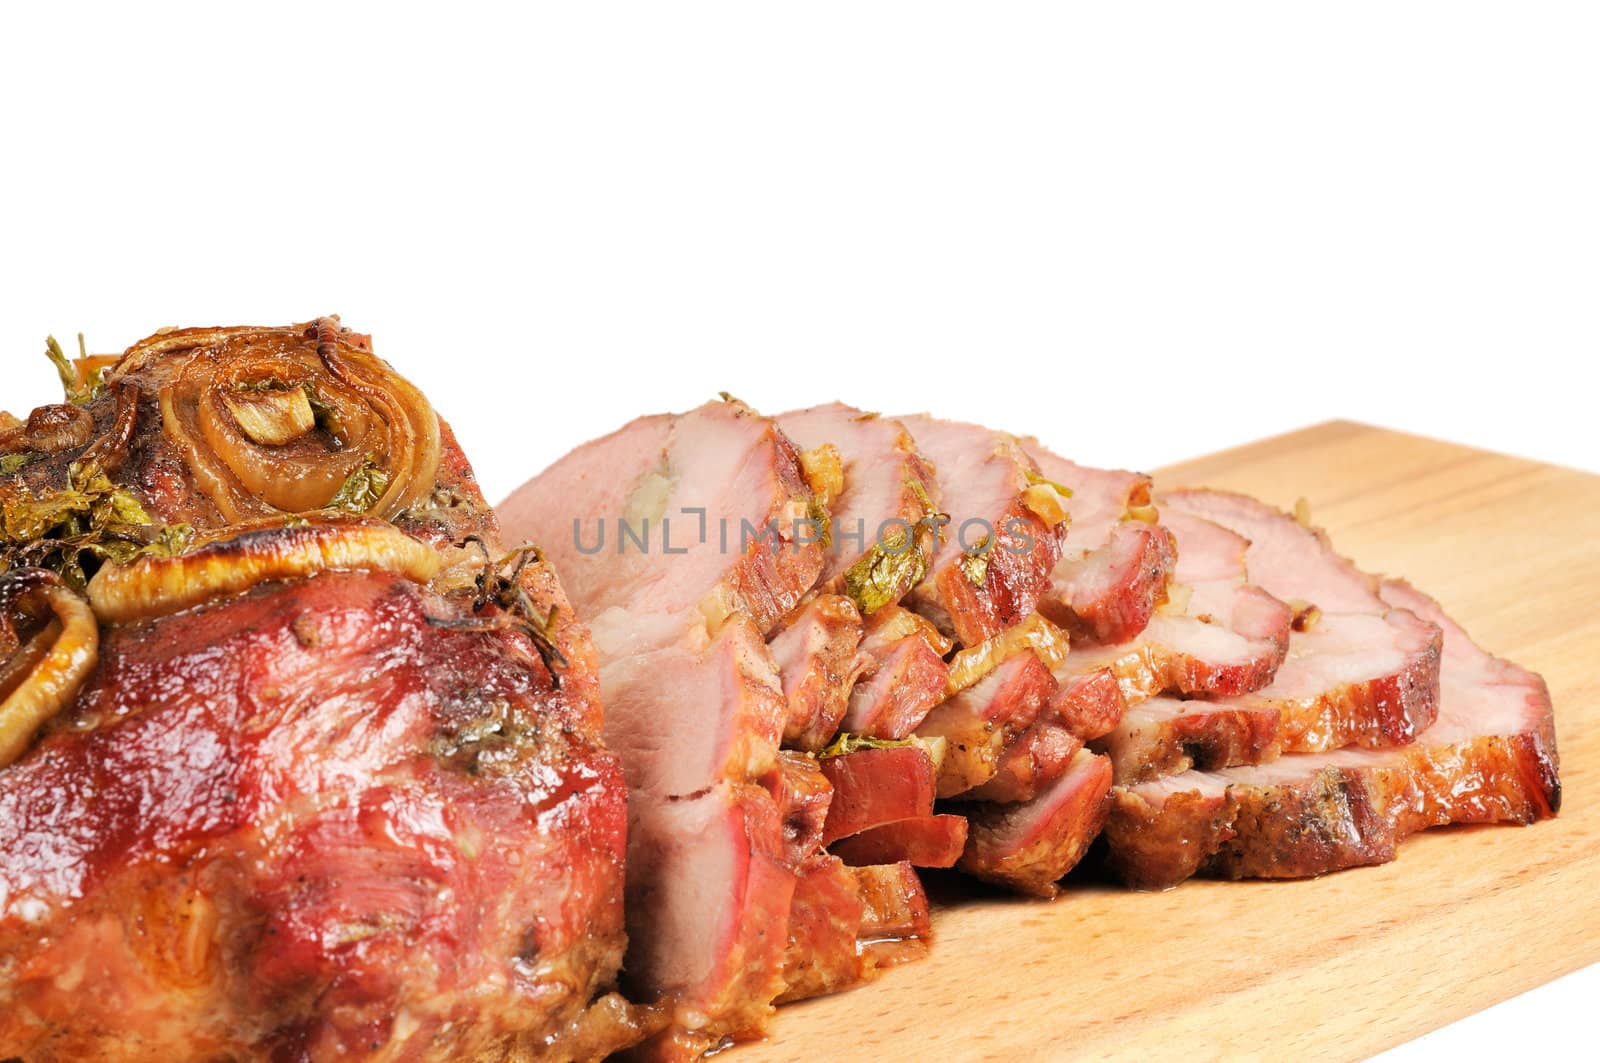 Roast pork on a wooden board. Isolated on white.